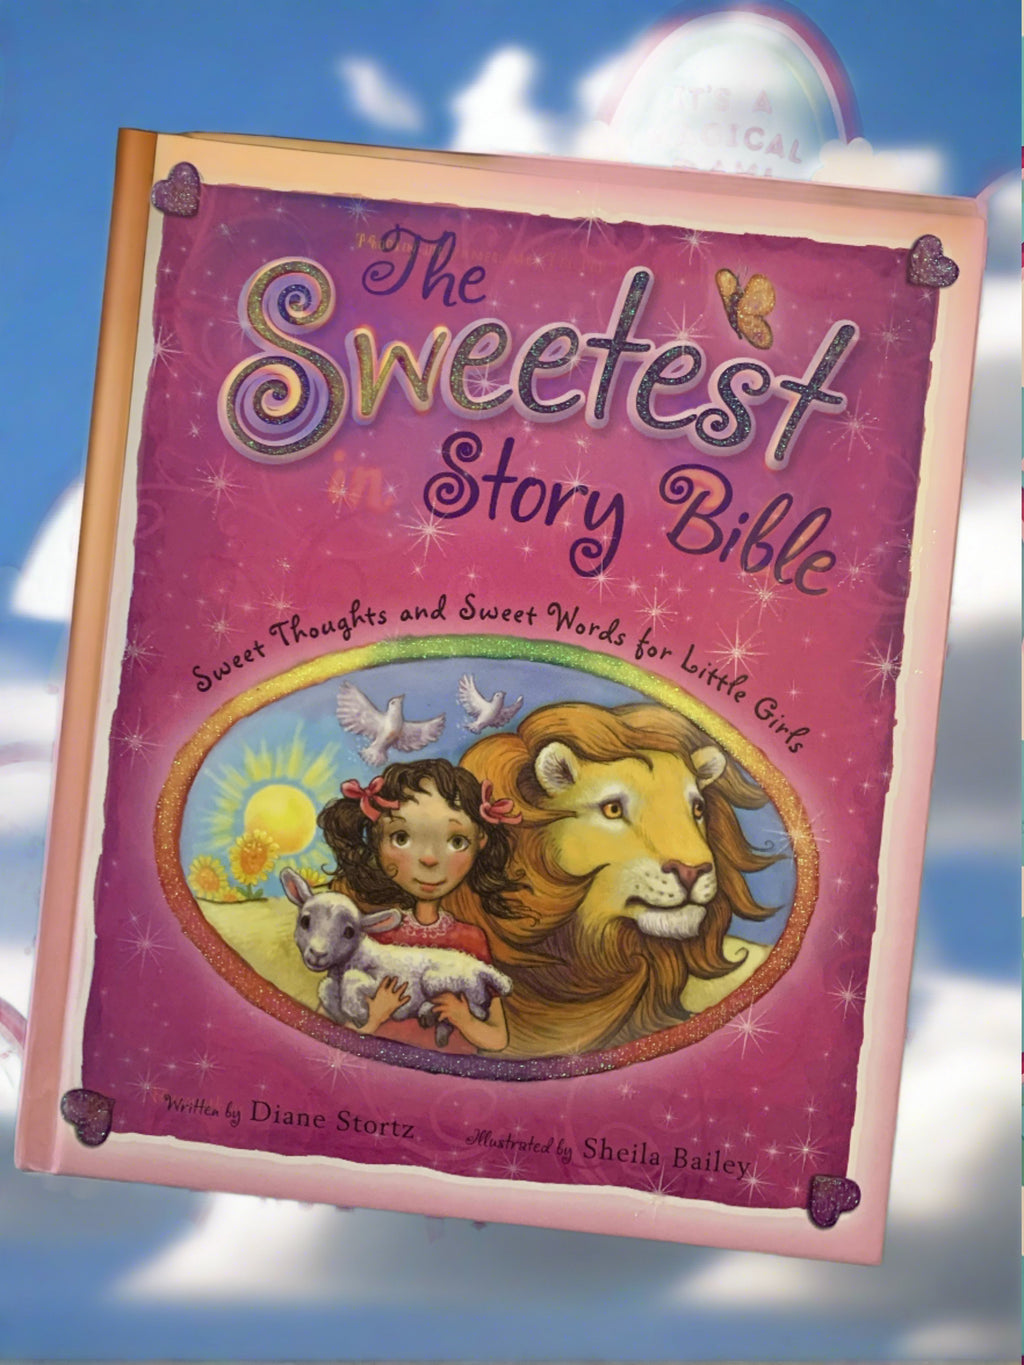 The Sweetest Story Bible: Sweet Thoughts and Sweet Words for Little Girls- By Diane Storz